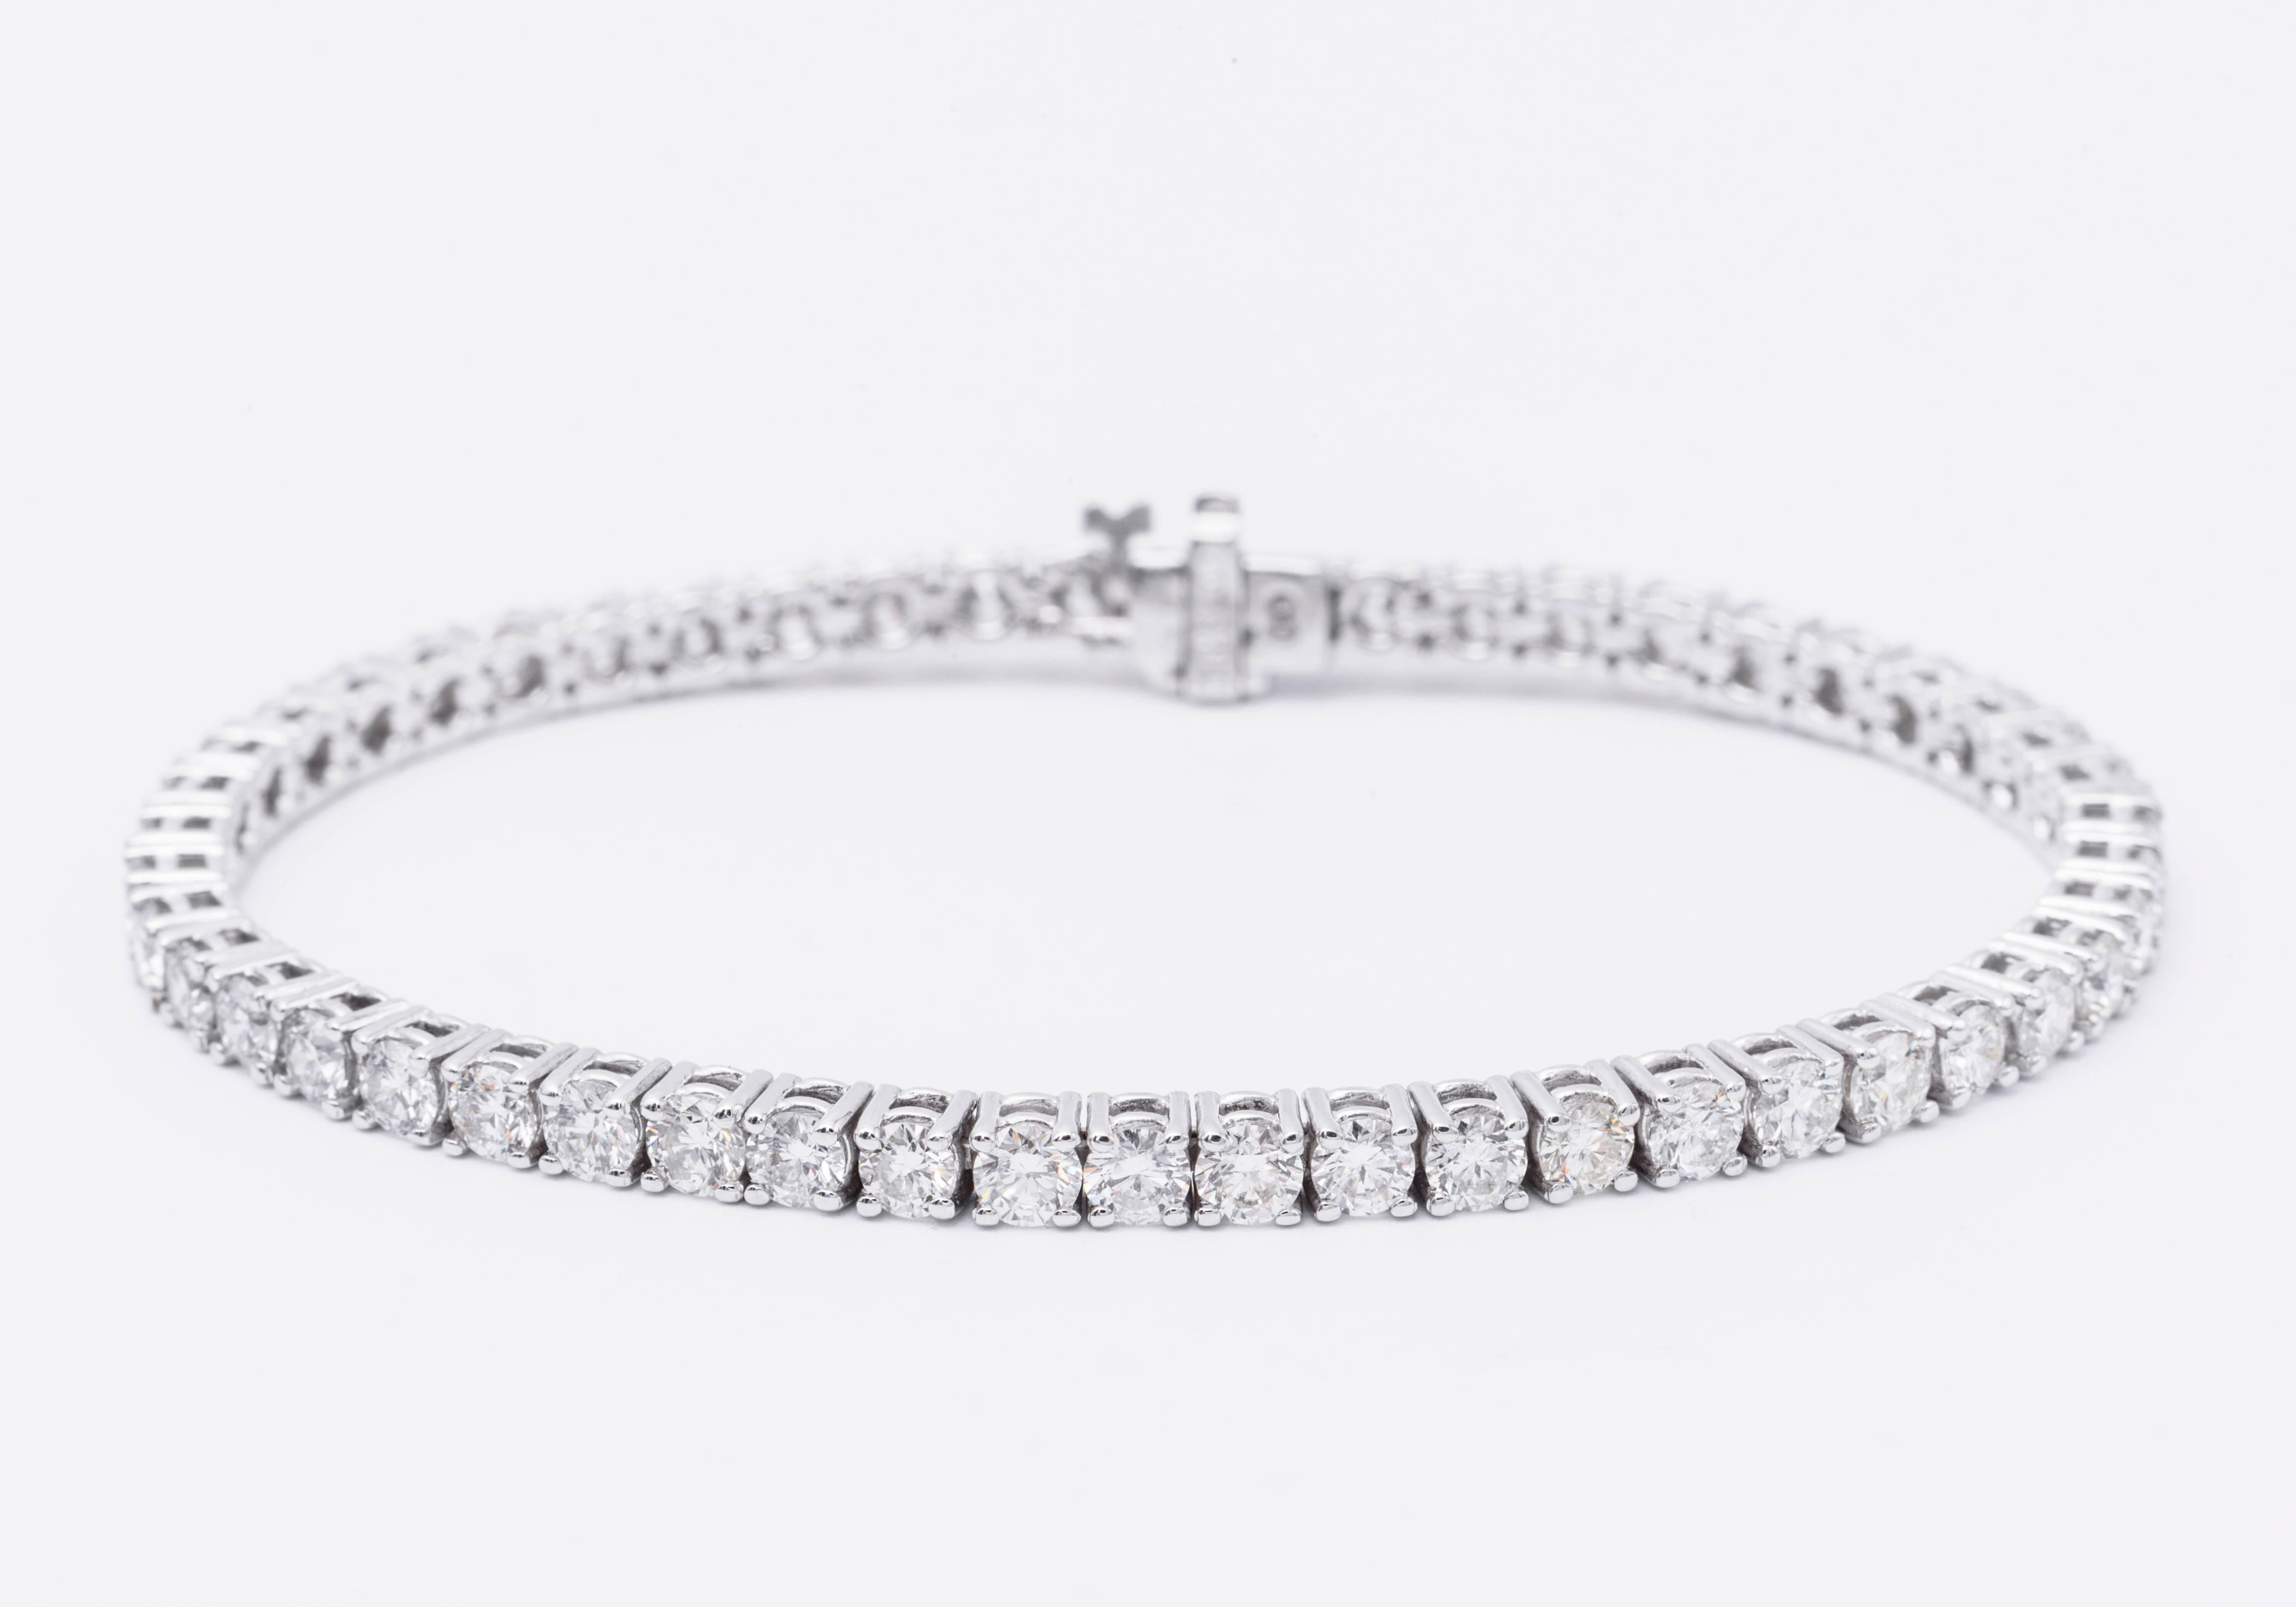 14 Karat White Gold diamond tennis bracelet featuring 61 round brilliants weighing 3 Carats.
Color G-H
Clarity SI

Can be made in 18 Karat White Gold or Yellow Gold
DM for pricing.

In stock 1-22 Carat Tennis bracelets.